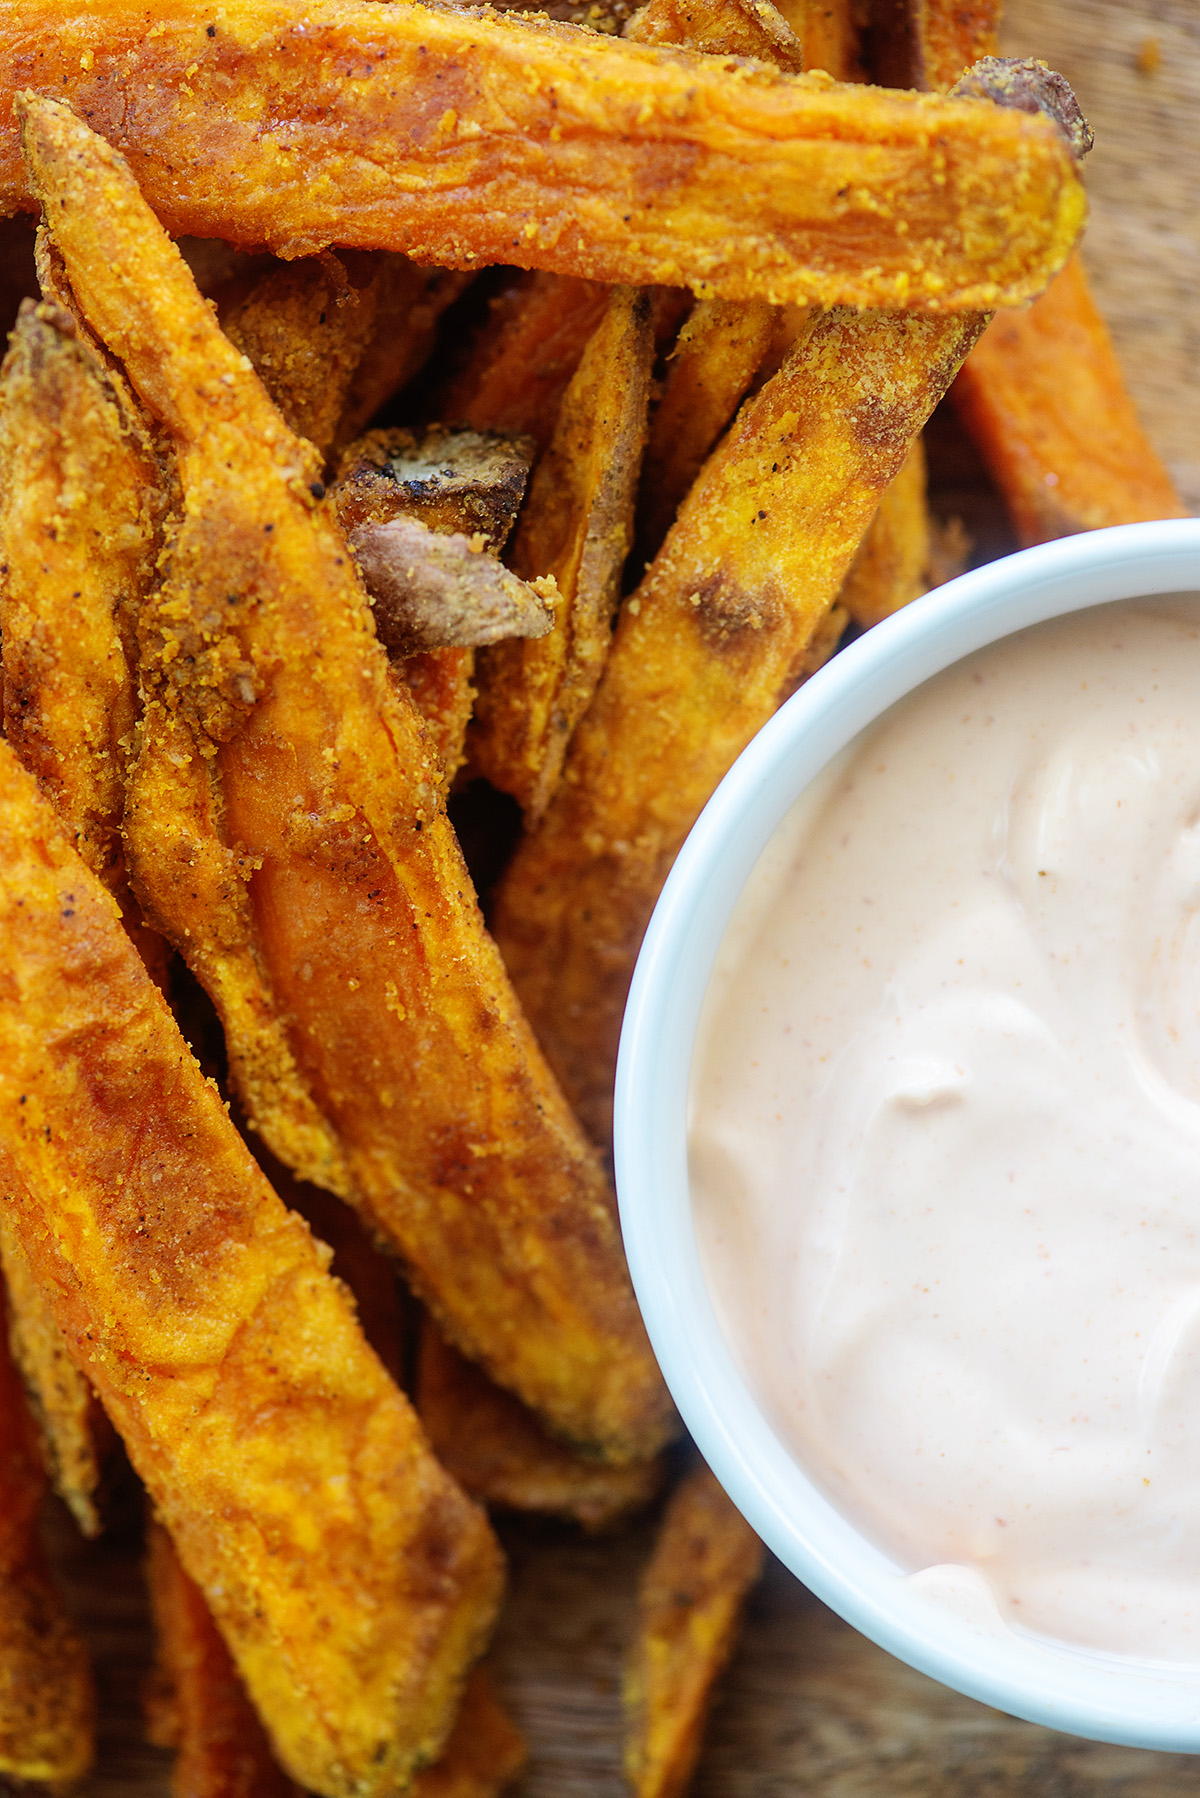 Overhead view of sweet potato fries next to a cup of dipping sauce.